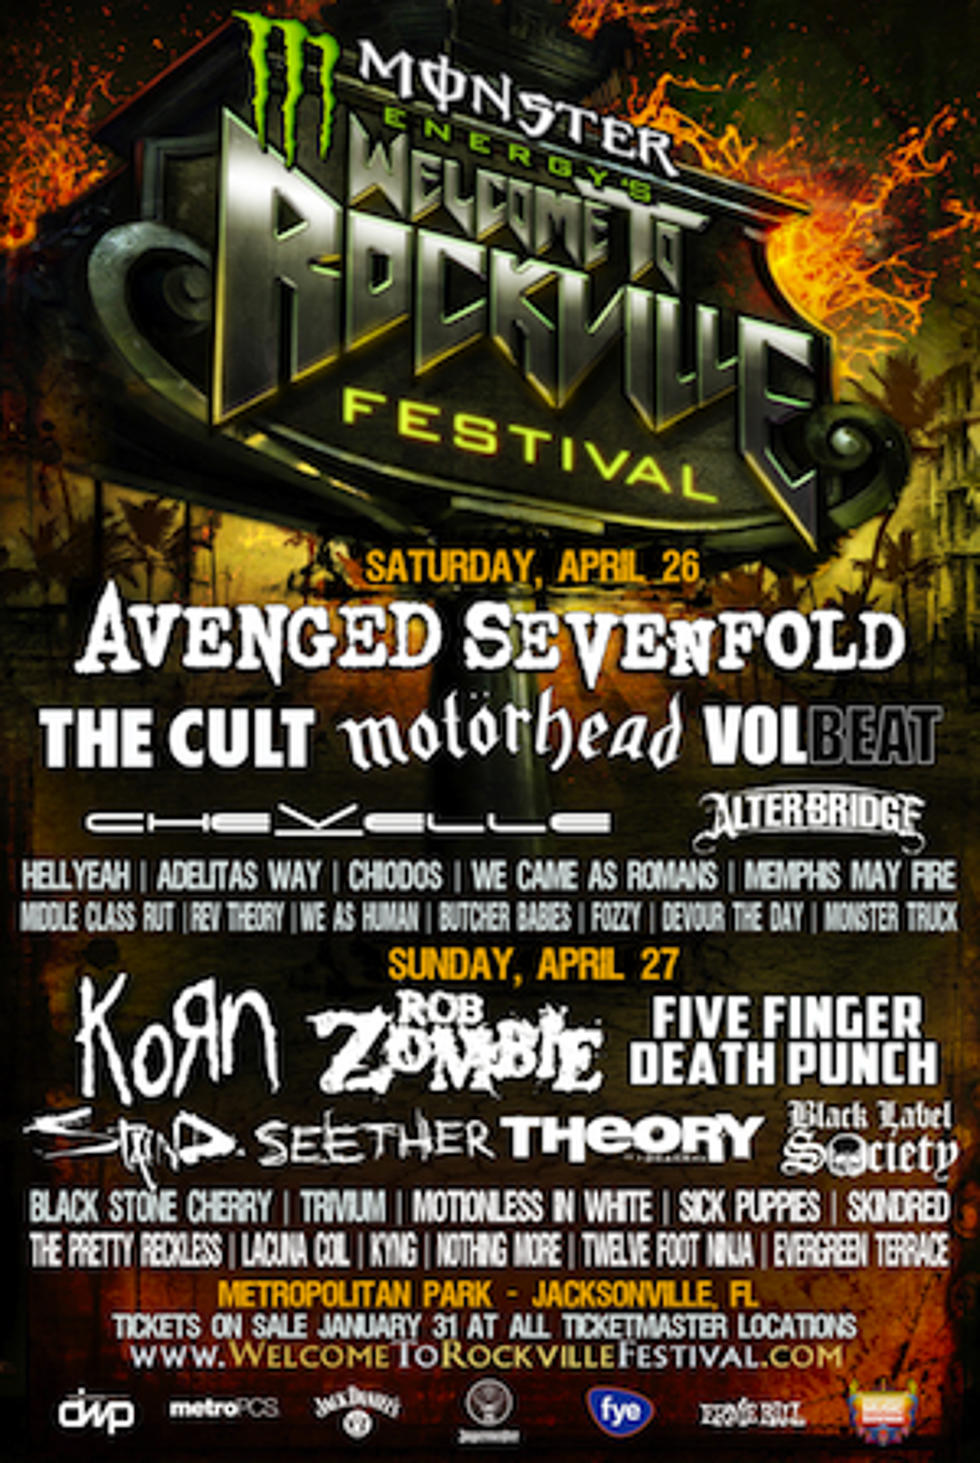 Avenged Sevenfold, Korn, Alter Bridge, 5FDP + Rob Zombie Lead Welcome to Rockville 2014 Lineup